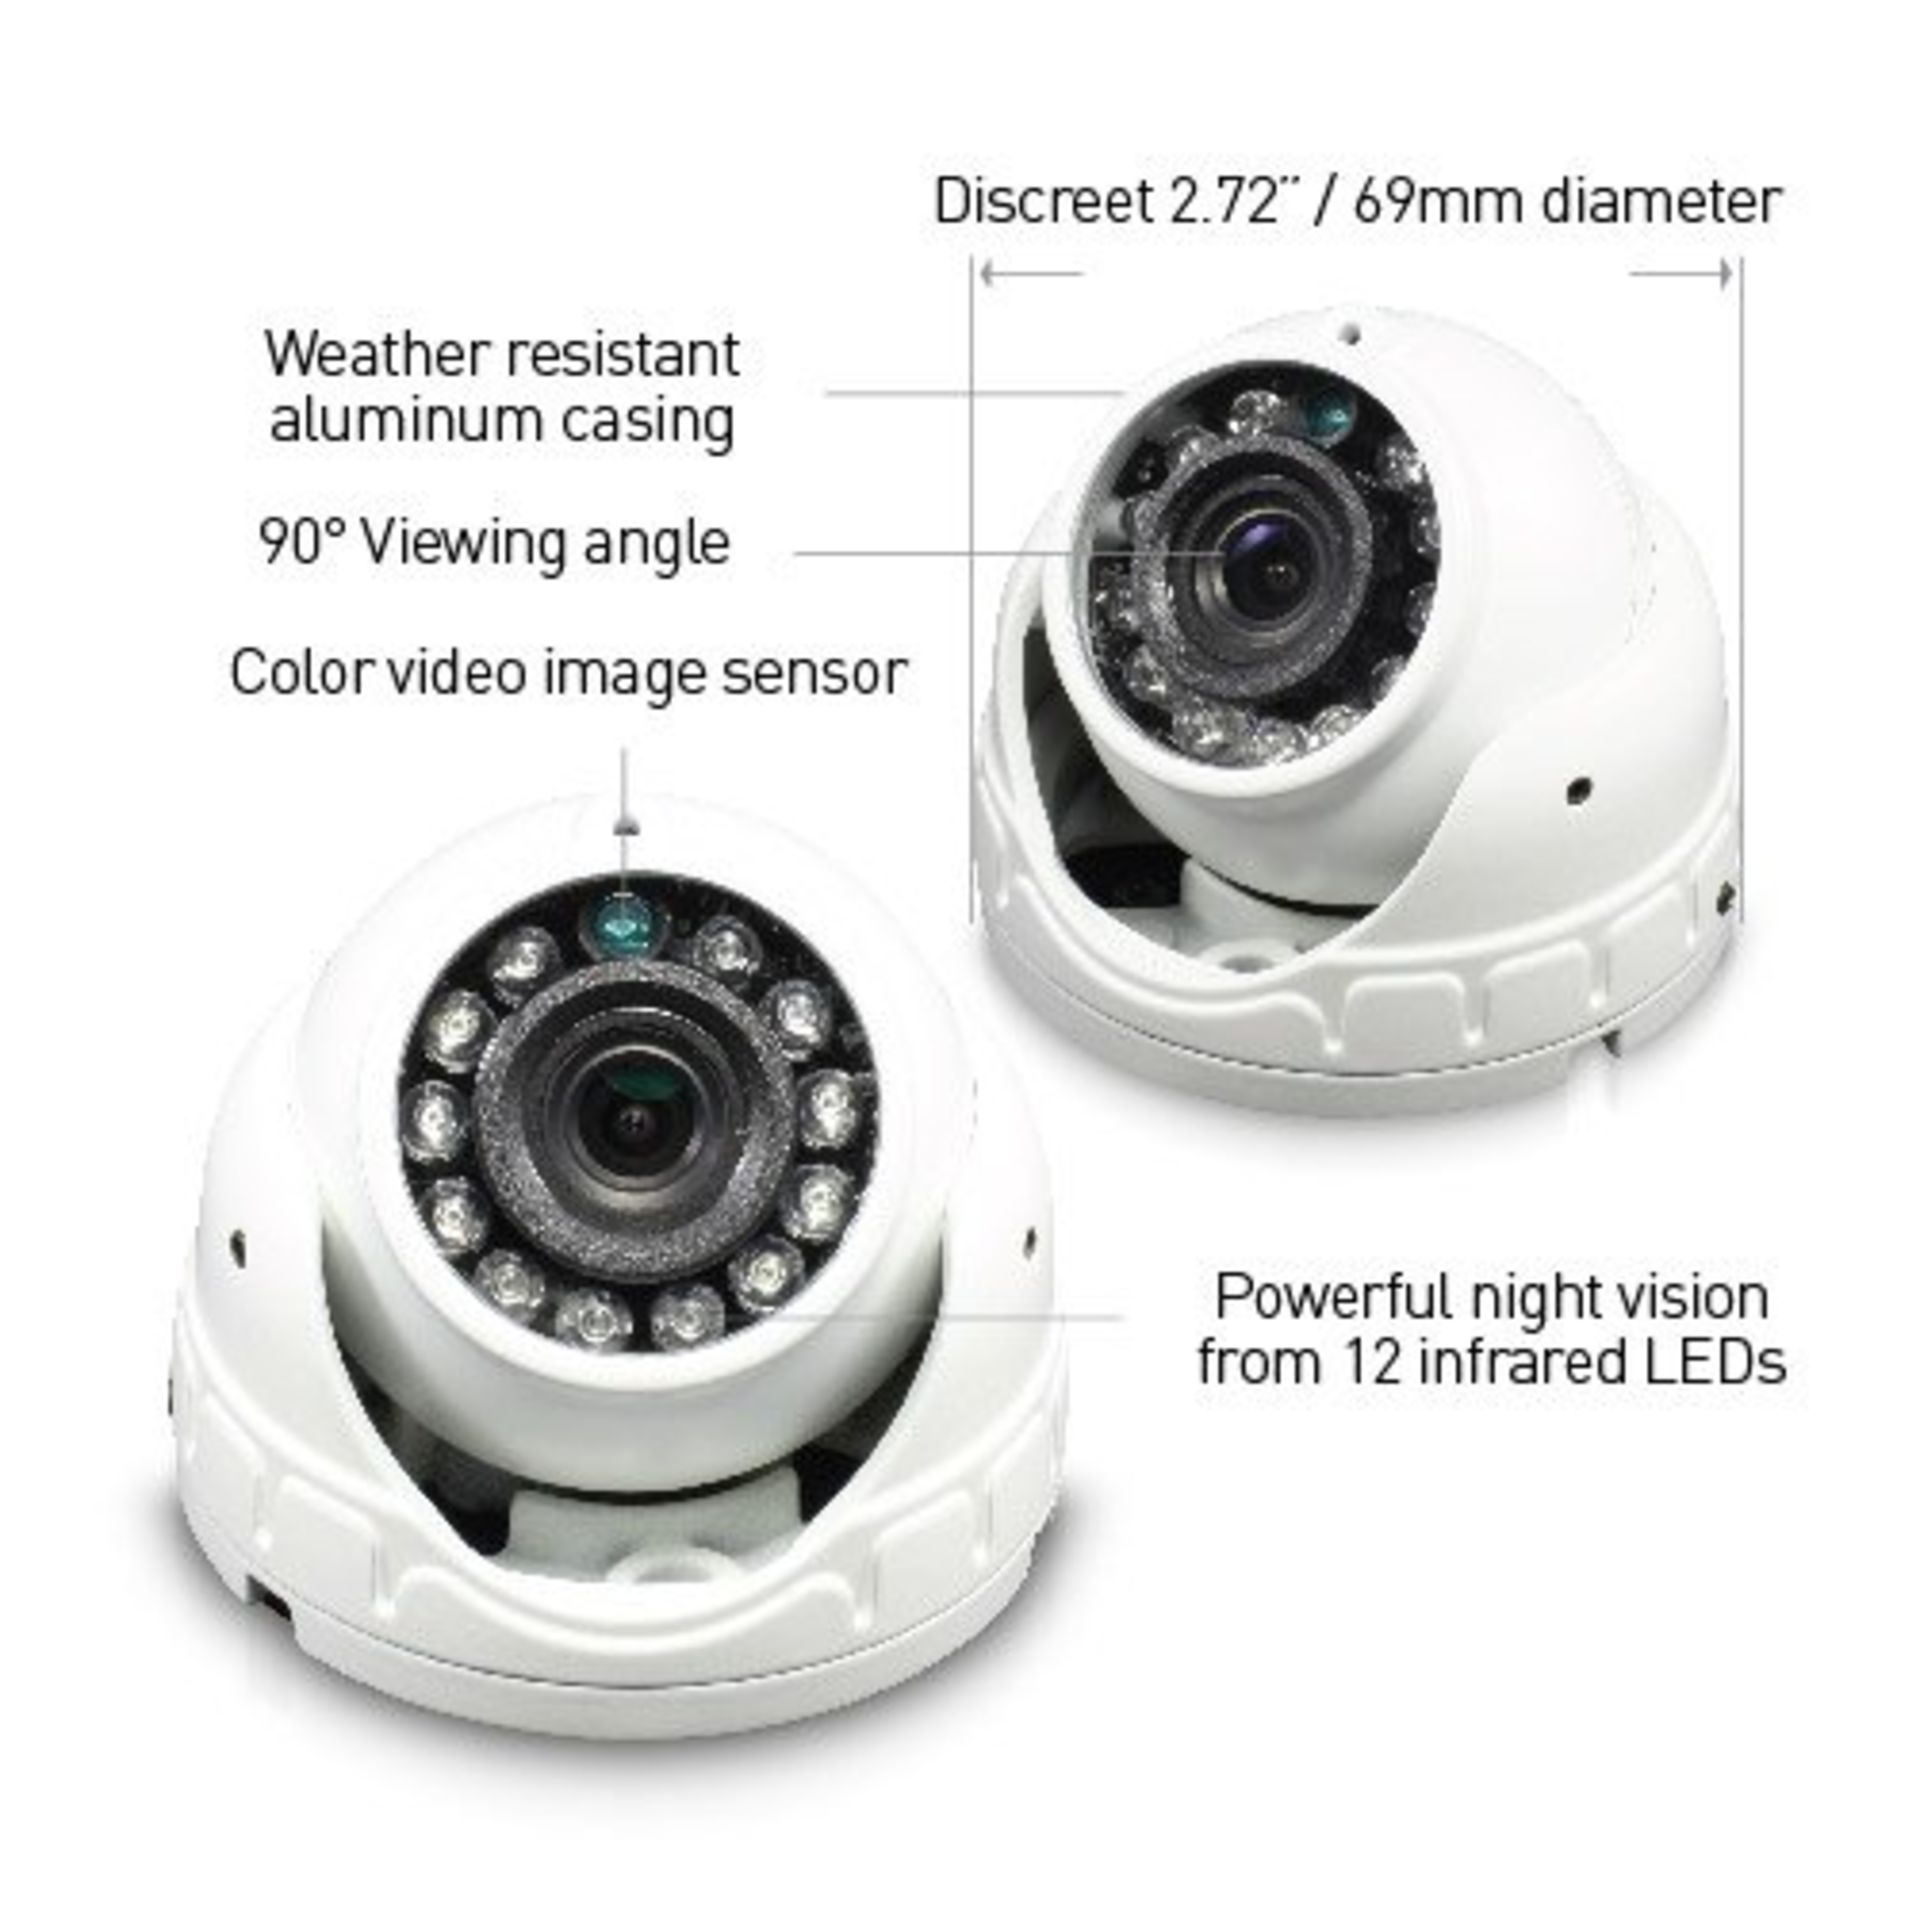 V Grade A Swann SW-1080FLD 1080P Dome Security Camera - Weather Resistant Casing- 90 degree